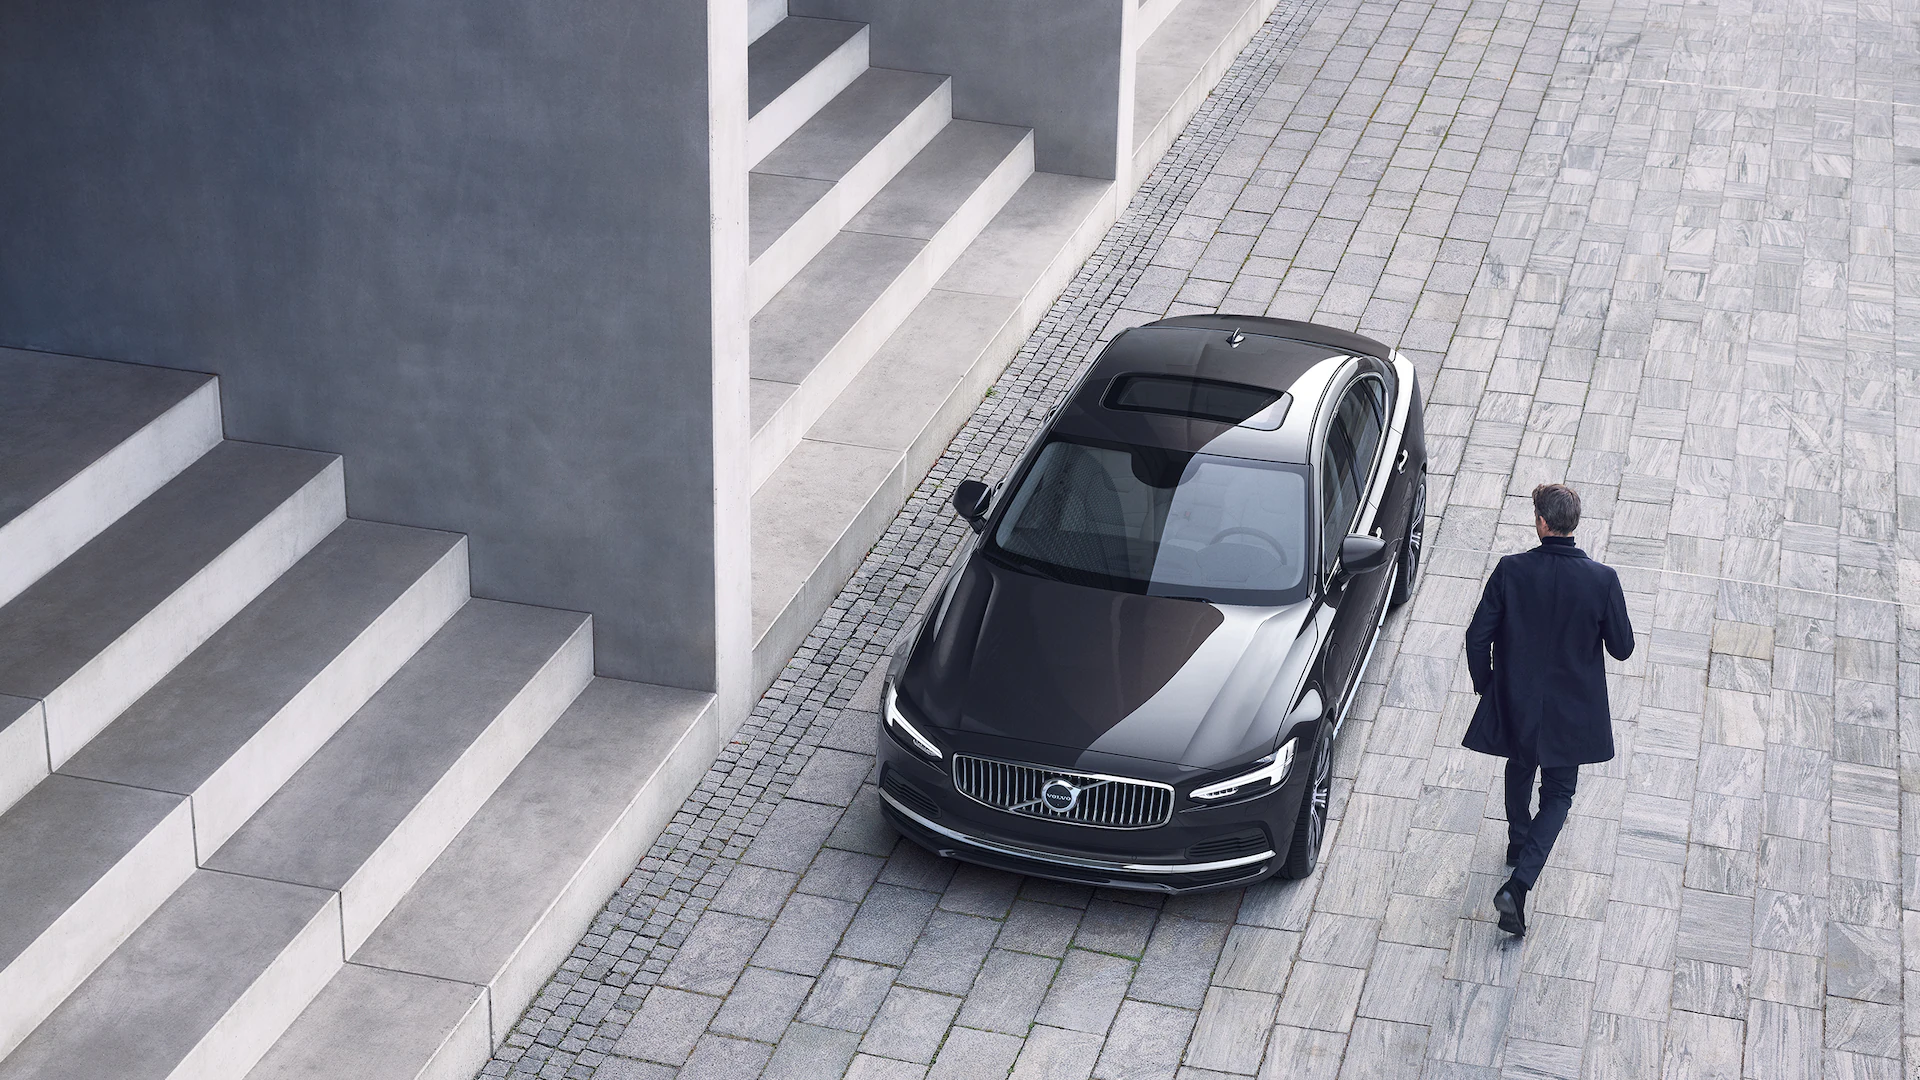 A Volvo S90 is parked in front of a set of stairs, a man walks towards the car.